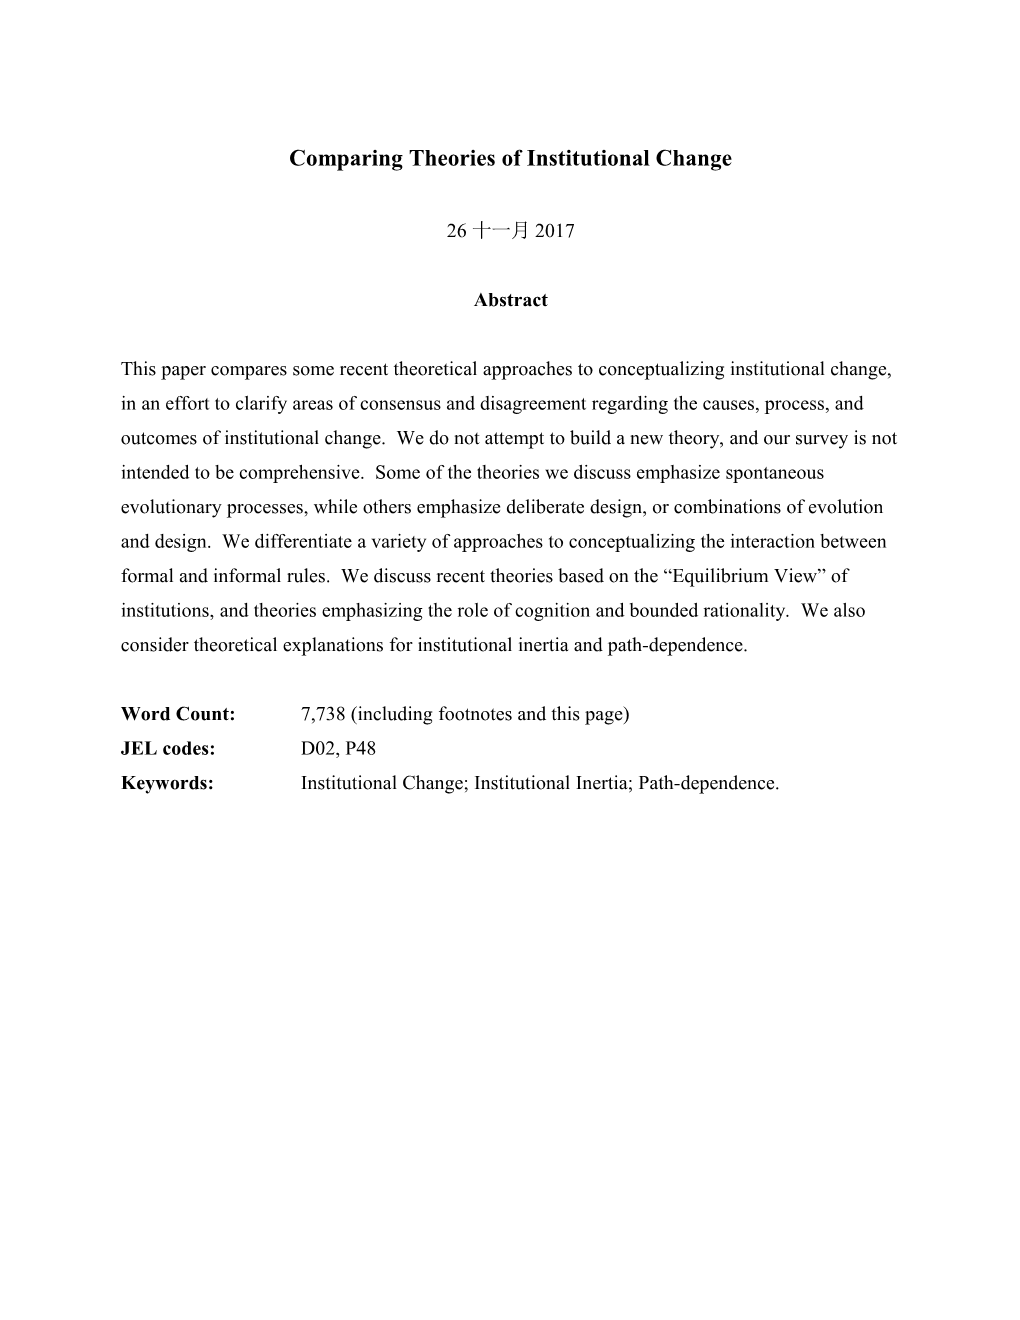 Comparing Recent Theories Of Institutional Change